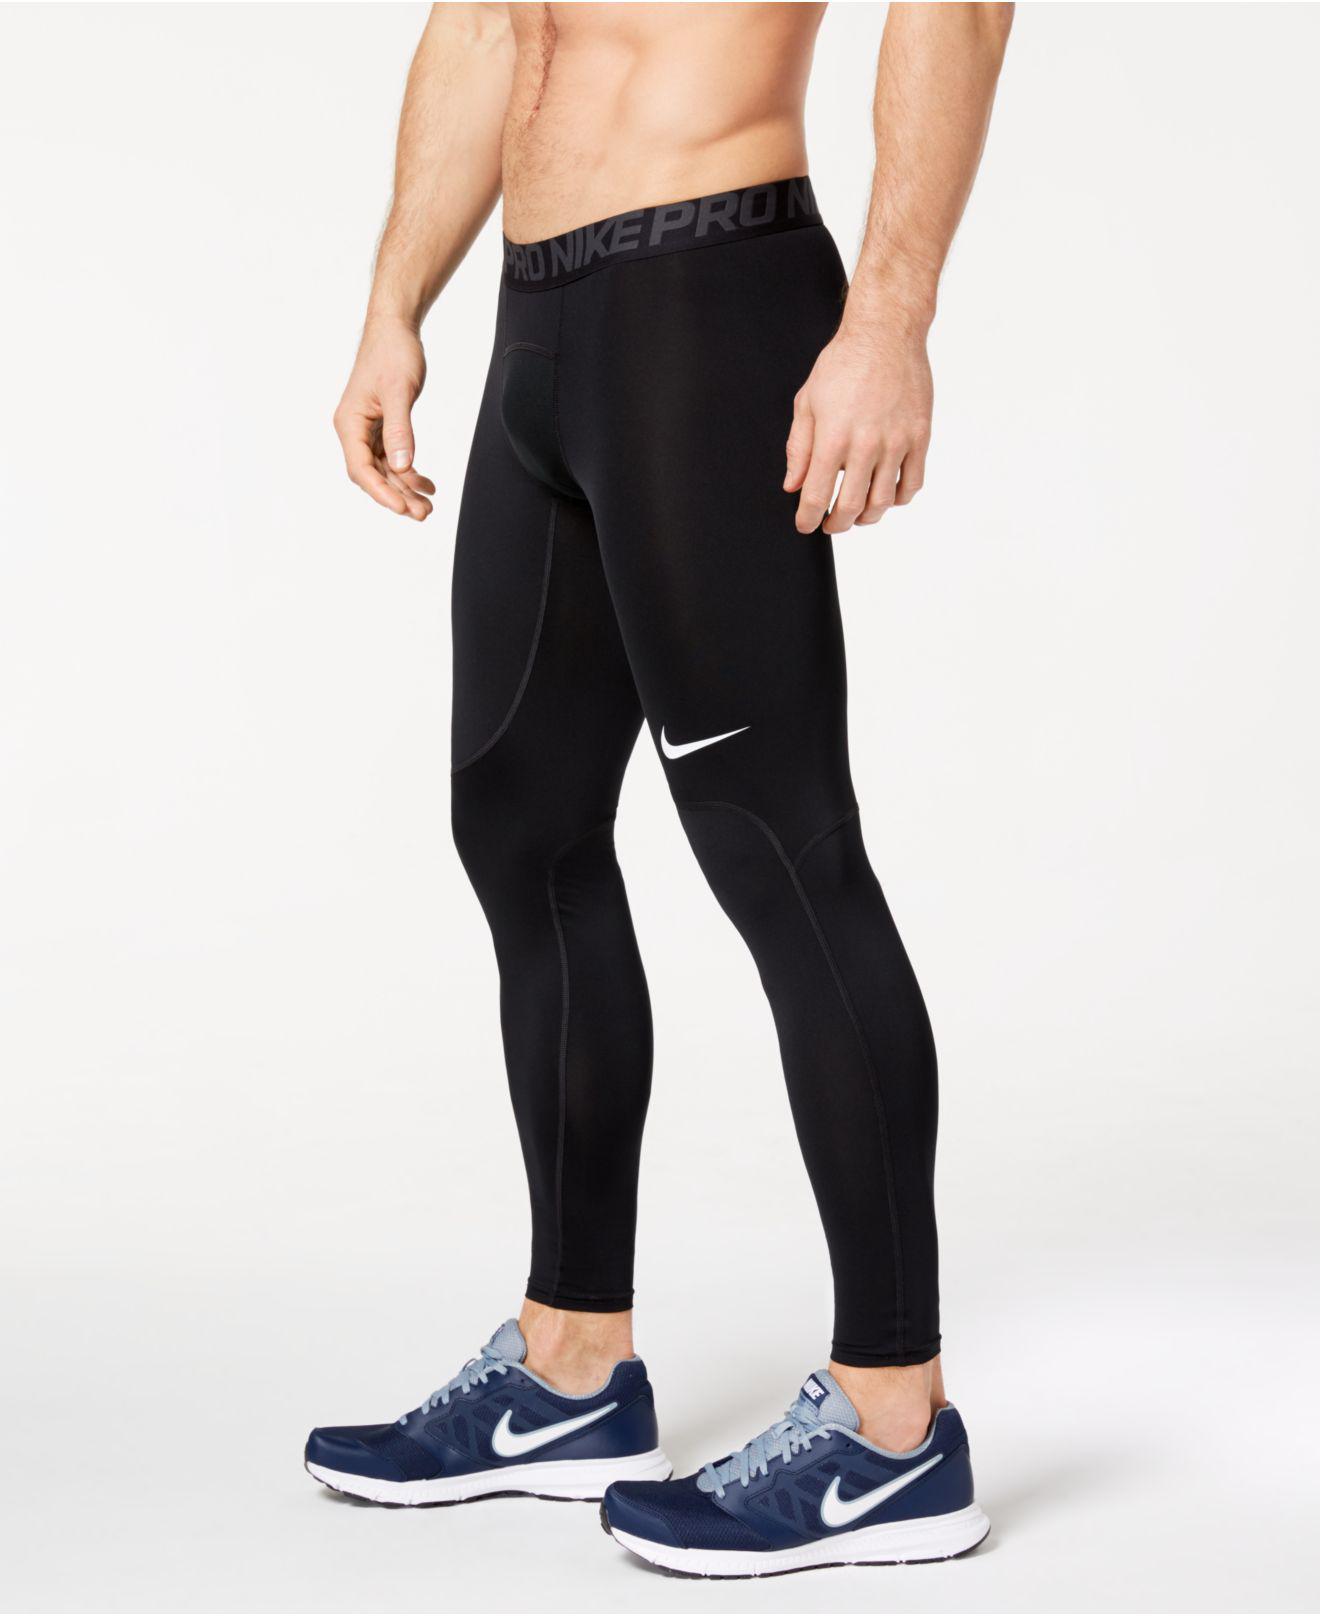 Nike Synthetic Pro Dri-fit Compression Tights in Black for Men - Lyst